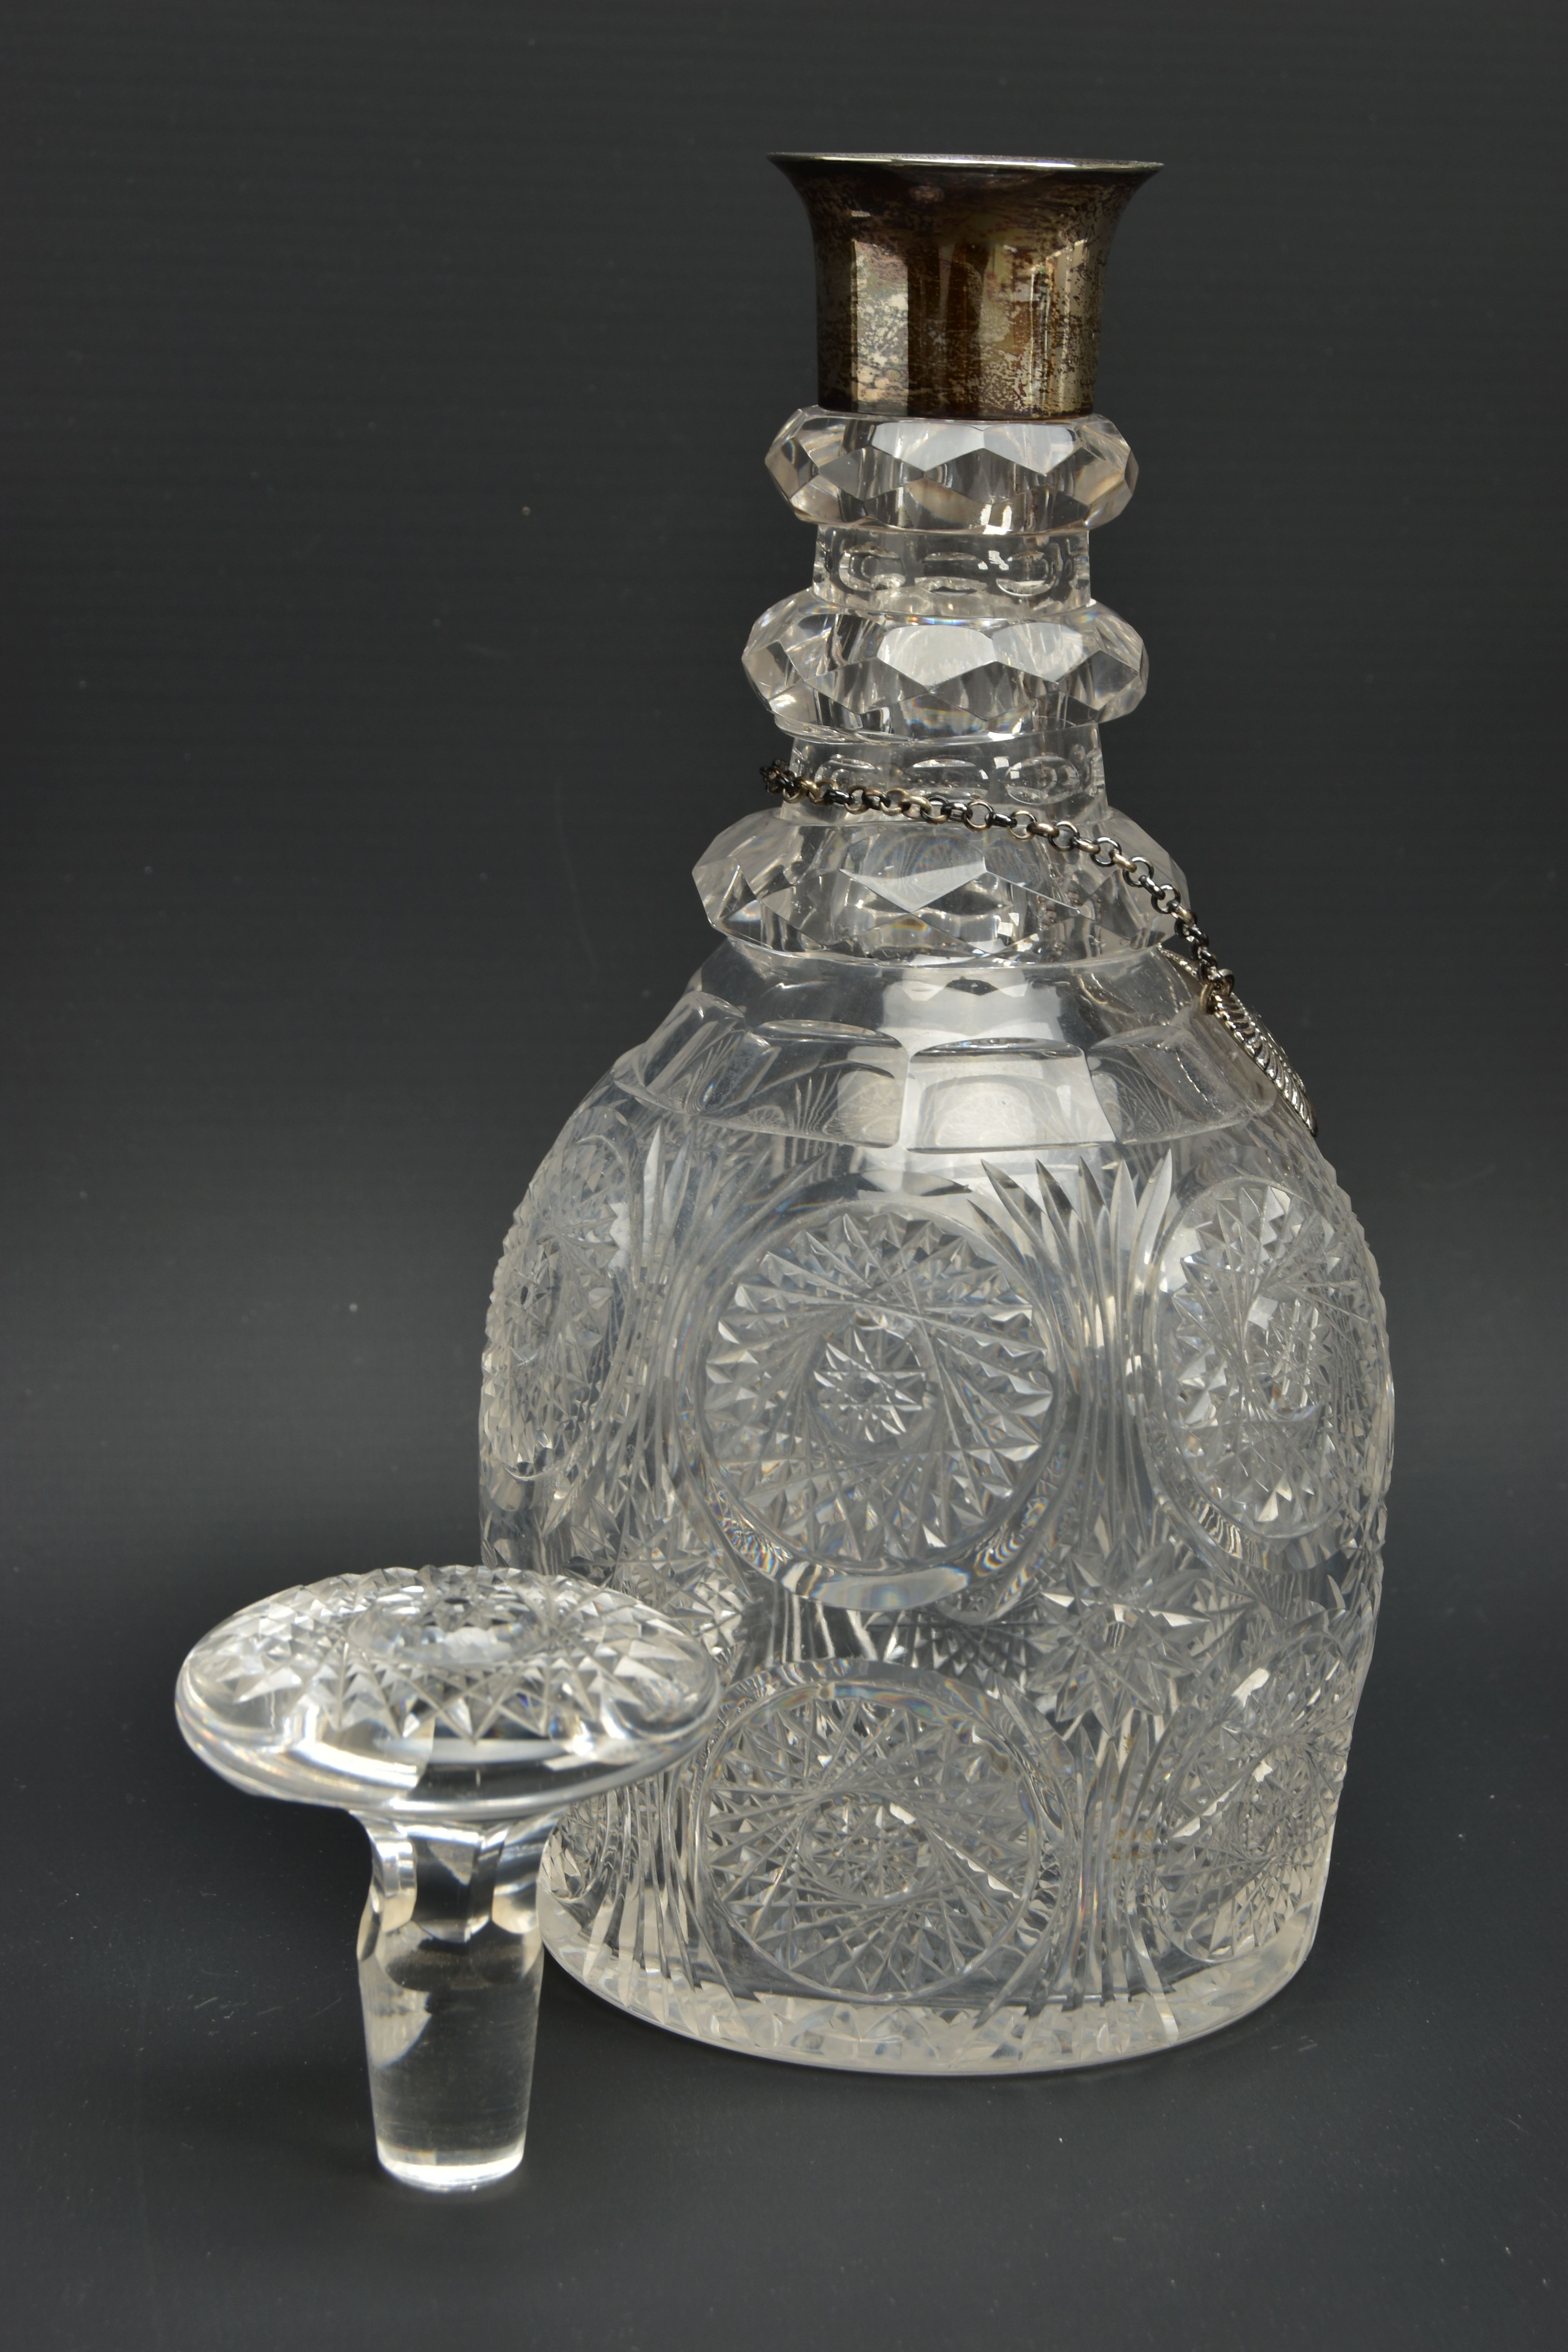 AN EARLY 19TH CENTURY PRUSSIAN SHAPED GLASS DECANTER AND A GEORGE V GLASS DECANTER, the early 19th - Image 11 of 15